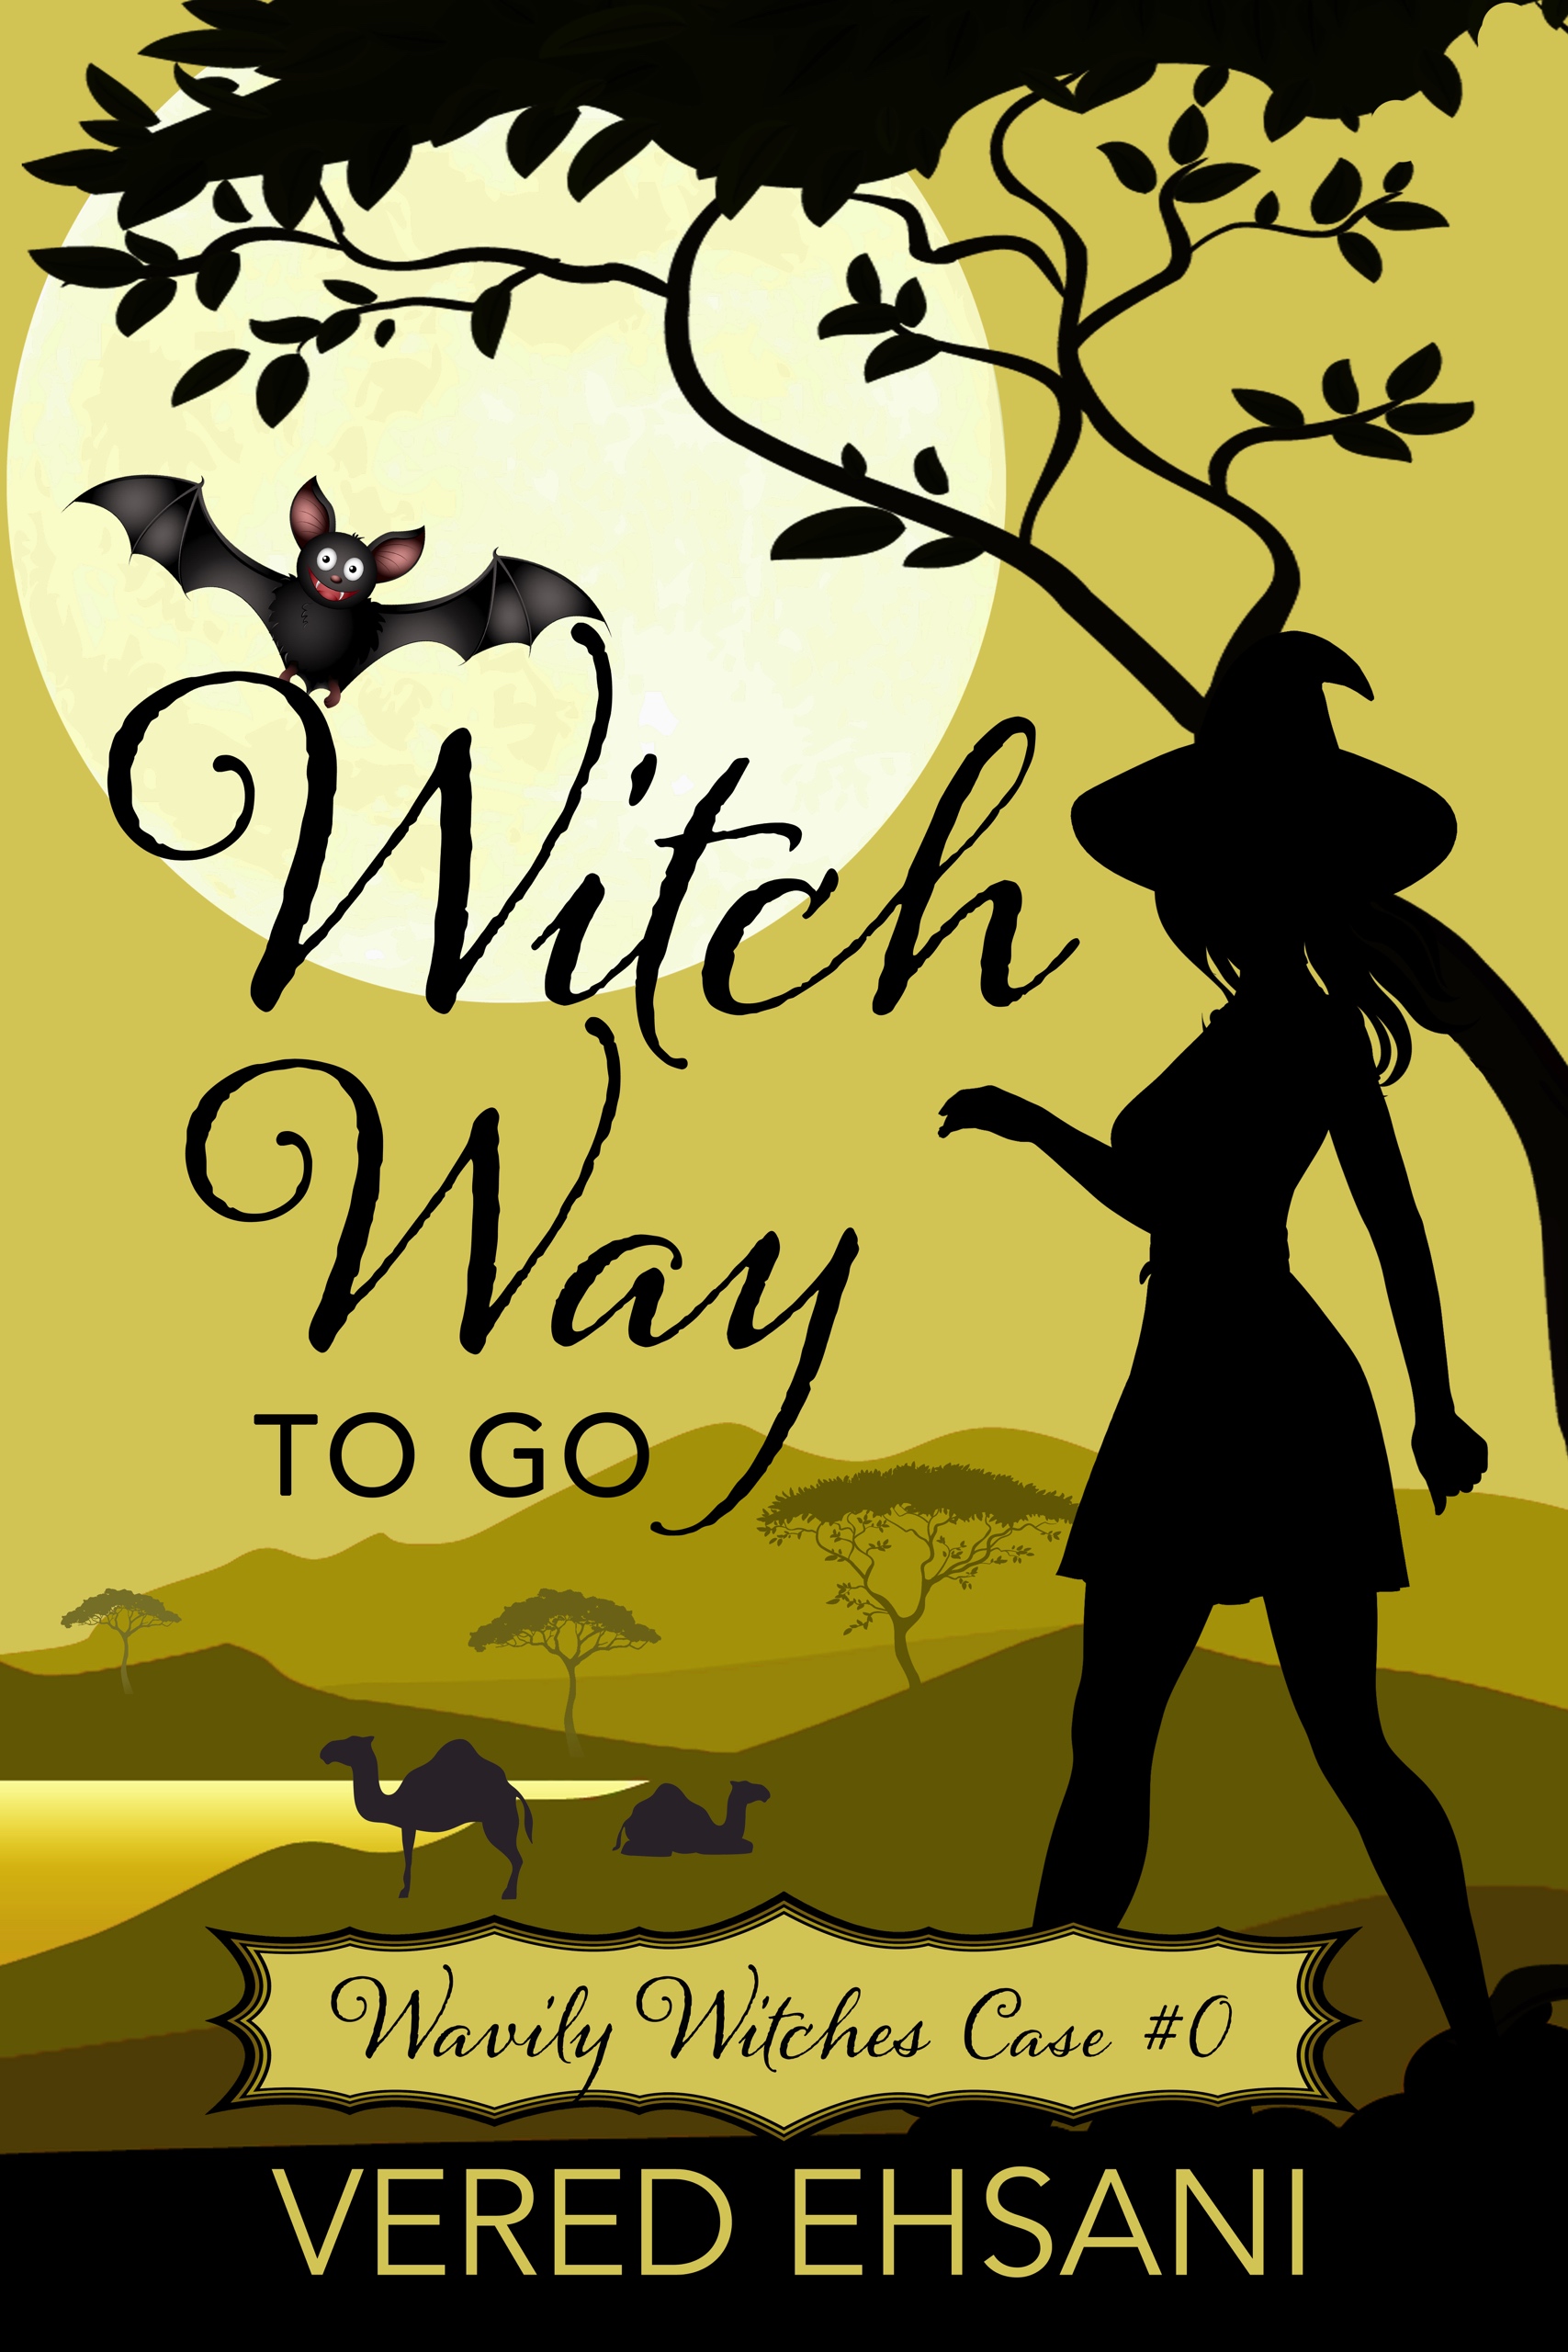 FREE: Witch Way To Go by Vered Ehsani